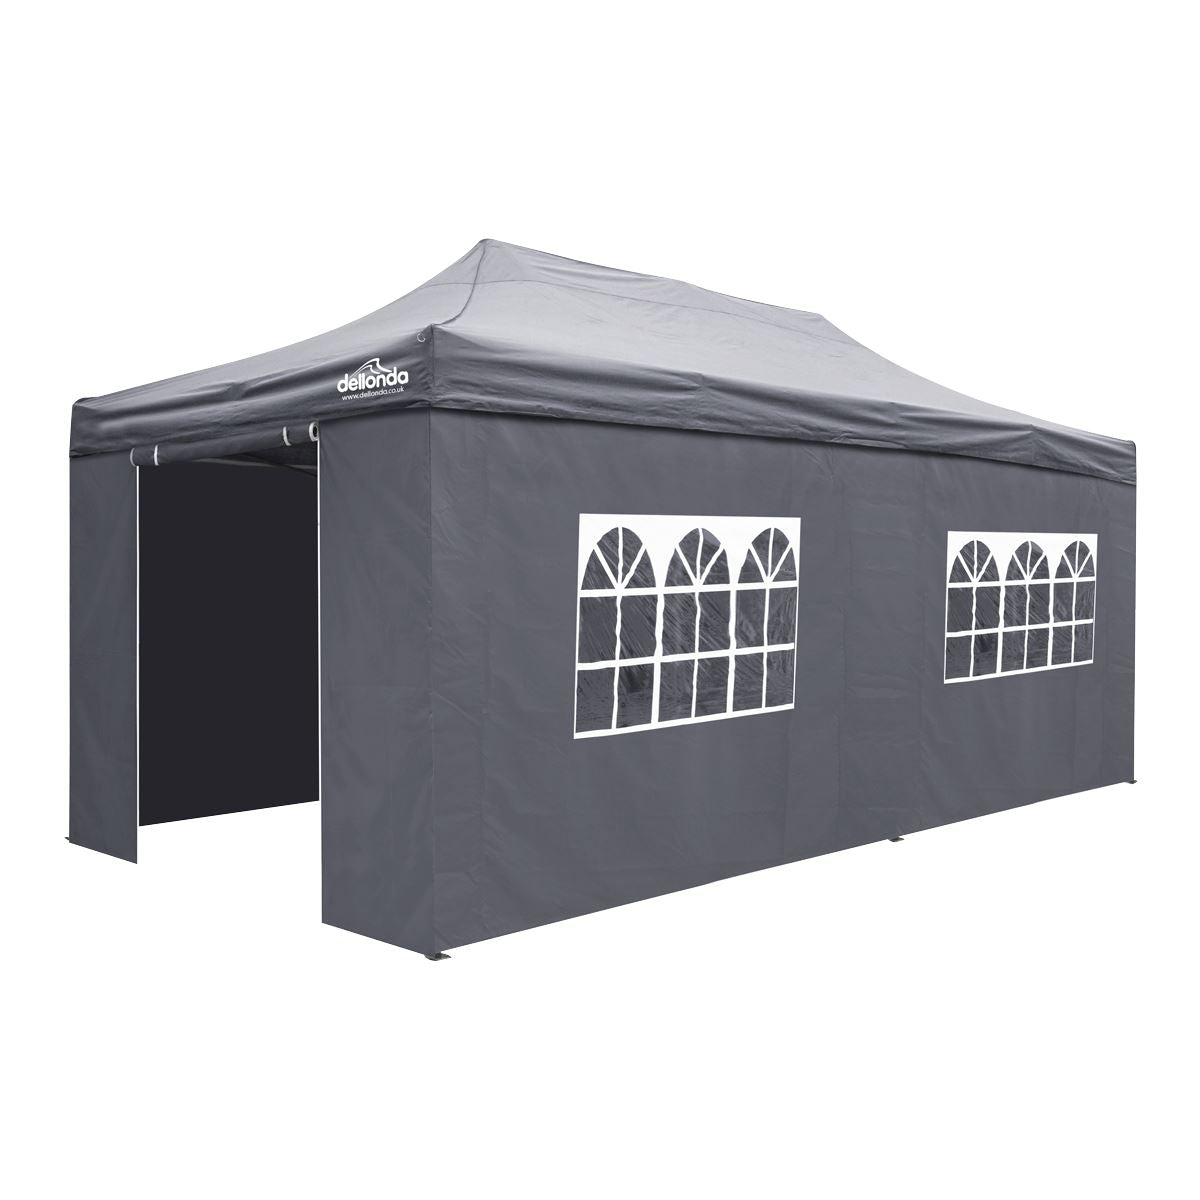 Dellonda Premium 3x6m Pop-Up Gazebo & Side Walls, PVC Coated, Water Resistant Fabric with Carry Bag, Rope, Stakes & Weight Bags - Grey